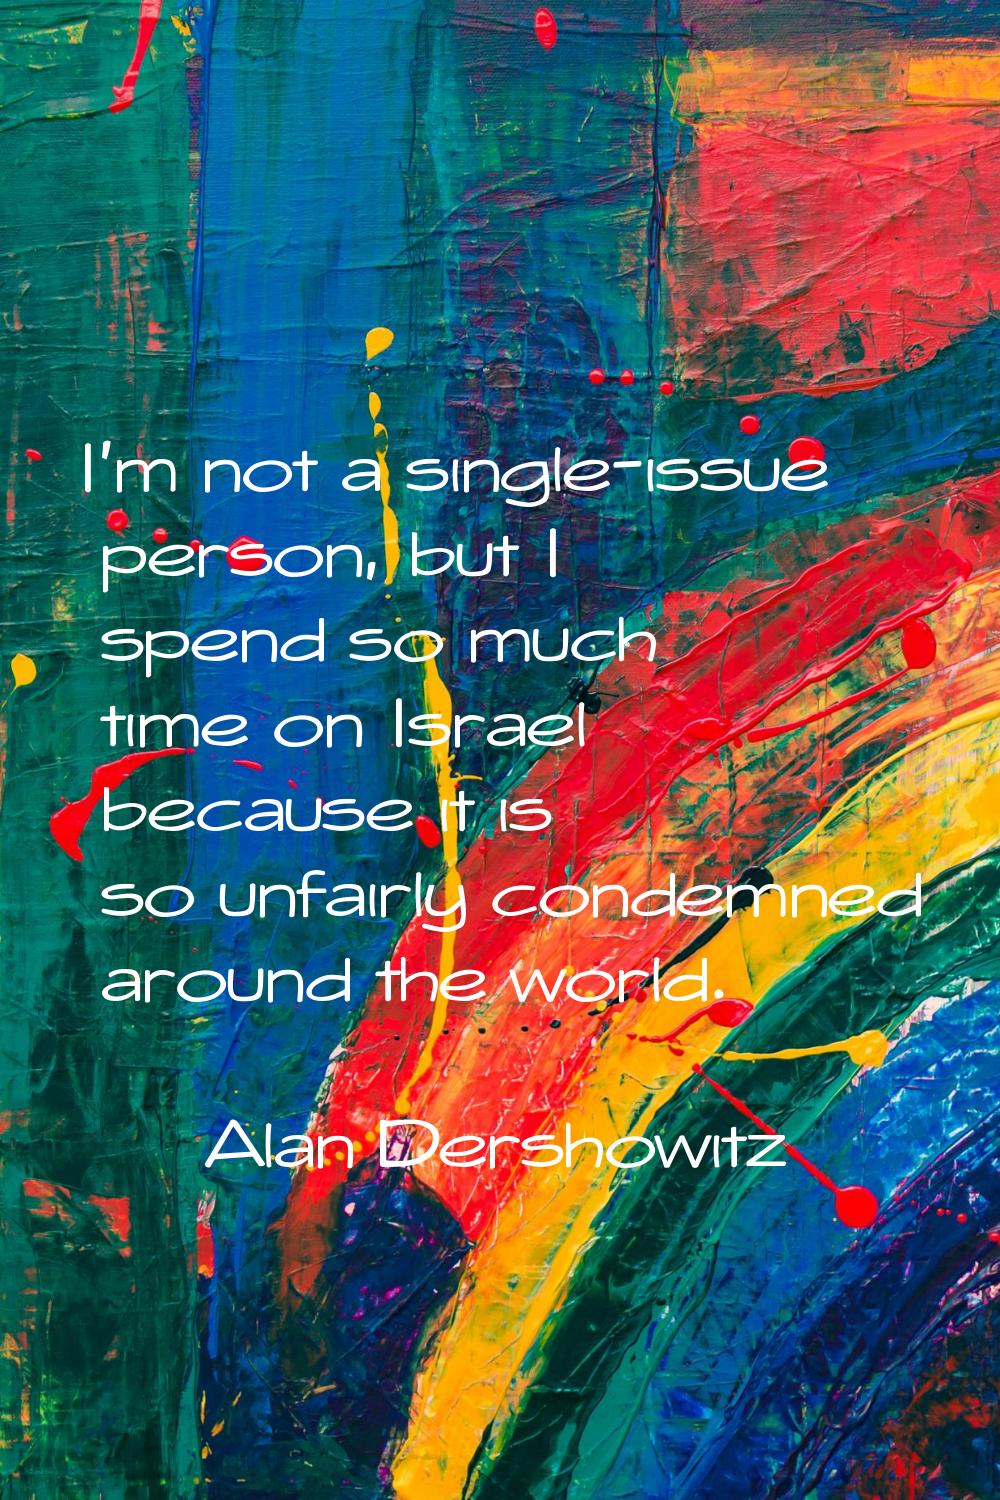 I'm not a single-issue person, but I spend so much time on Israel because it is so unfairly condemn